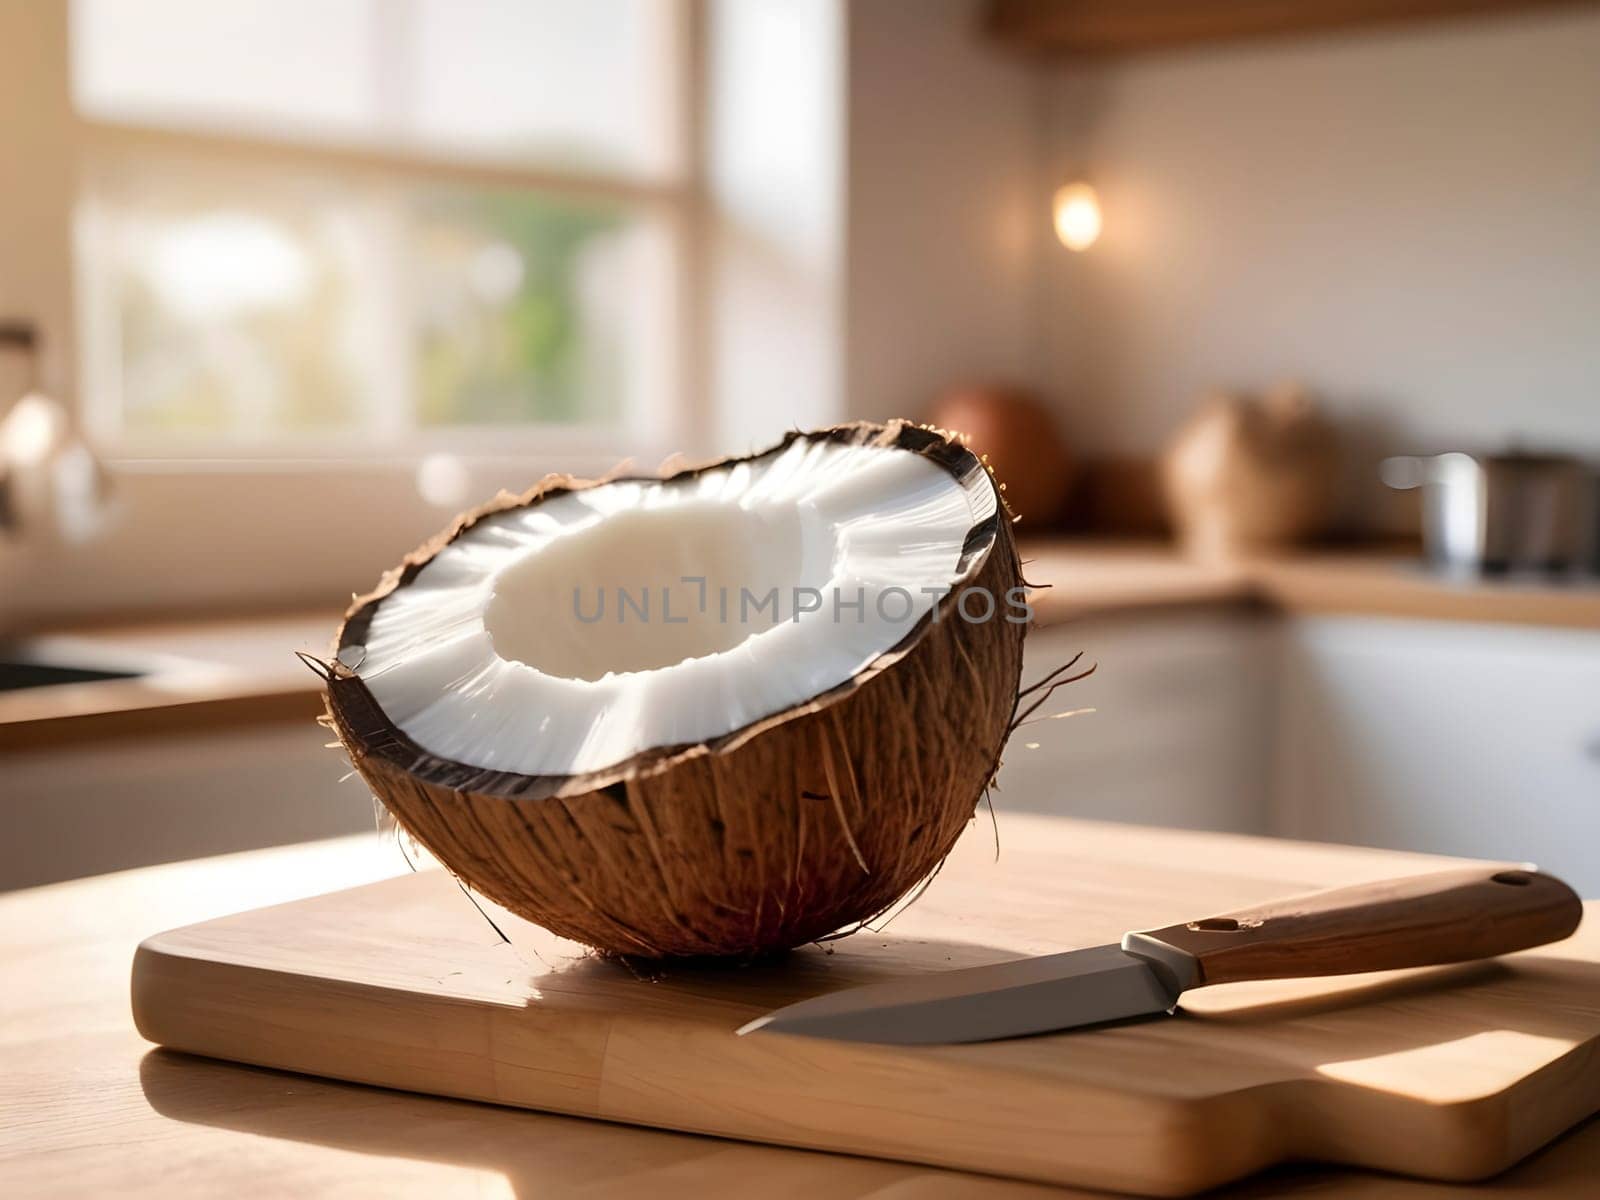 Culinary Elegance: Coconut on a Wooden Cutting Board bathed in Afternoon Light by mailos